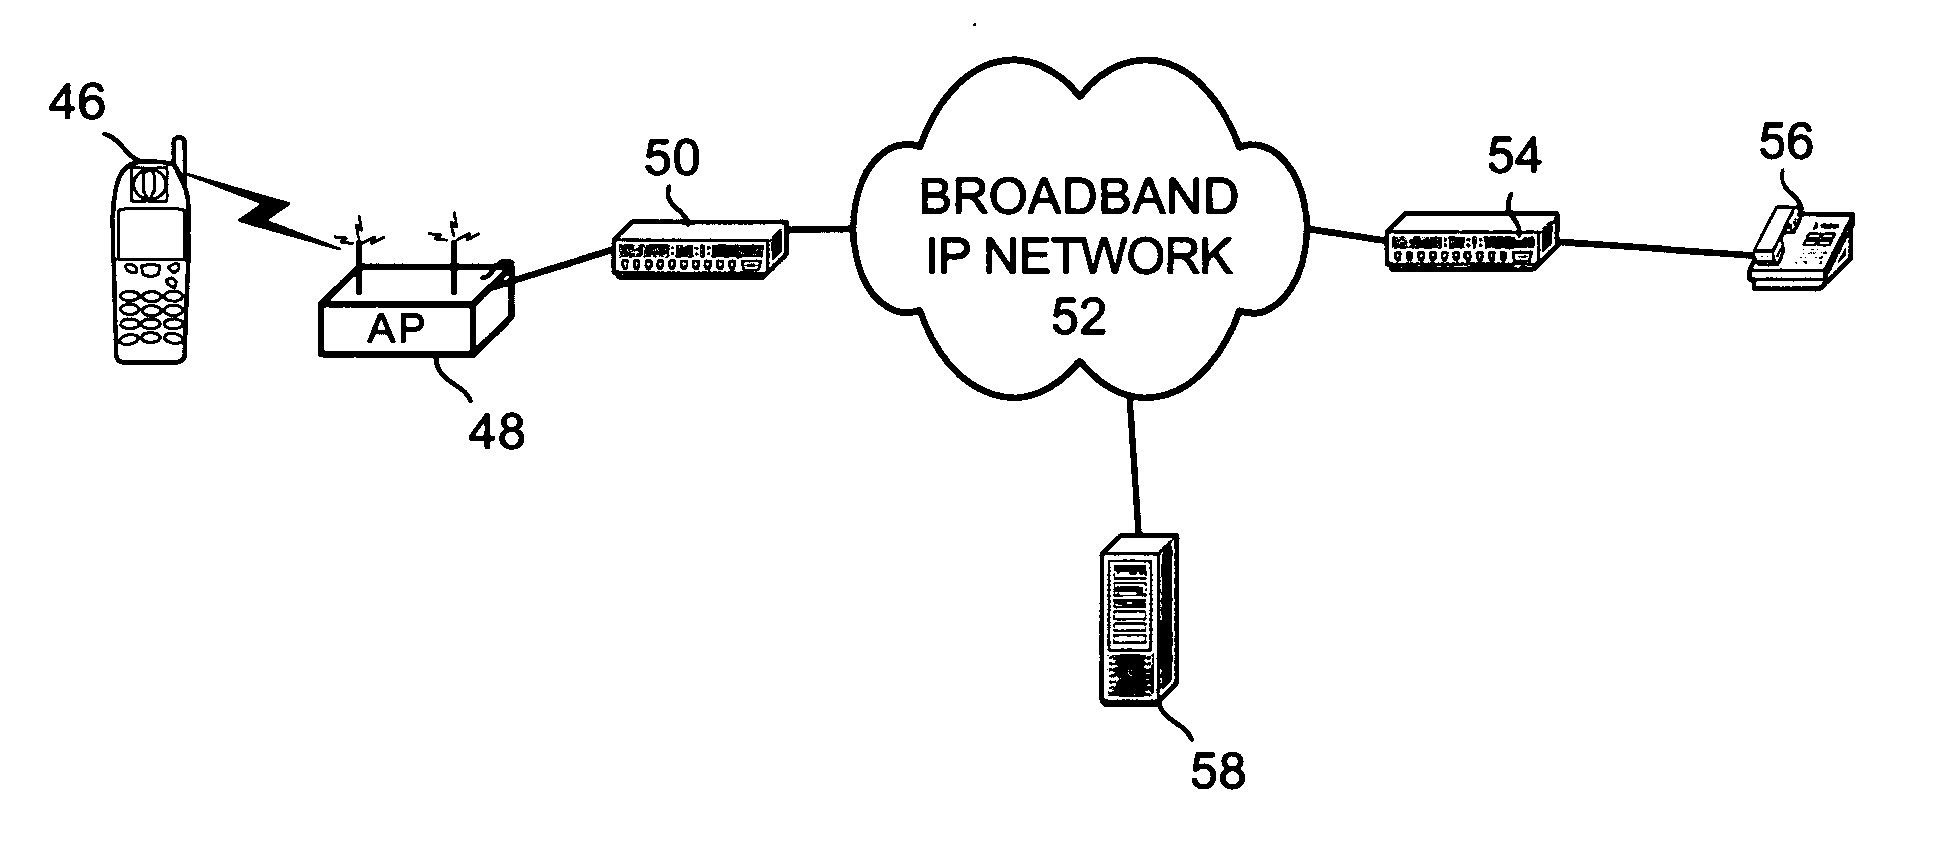 Delivery of video or voice mail messages over a packet network